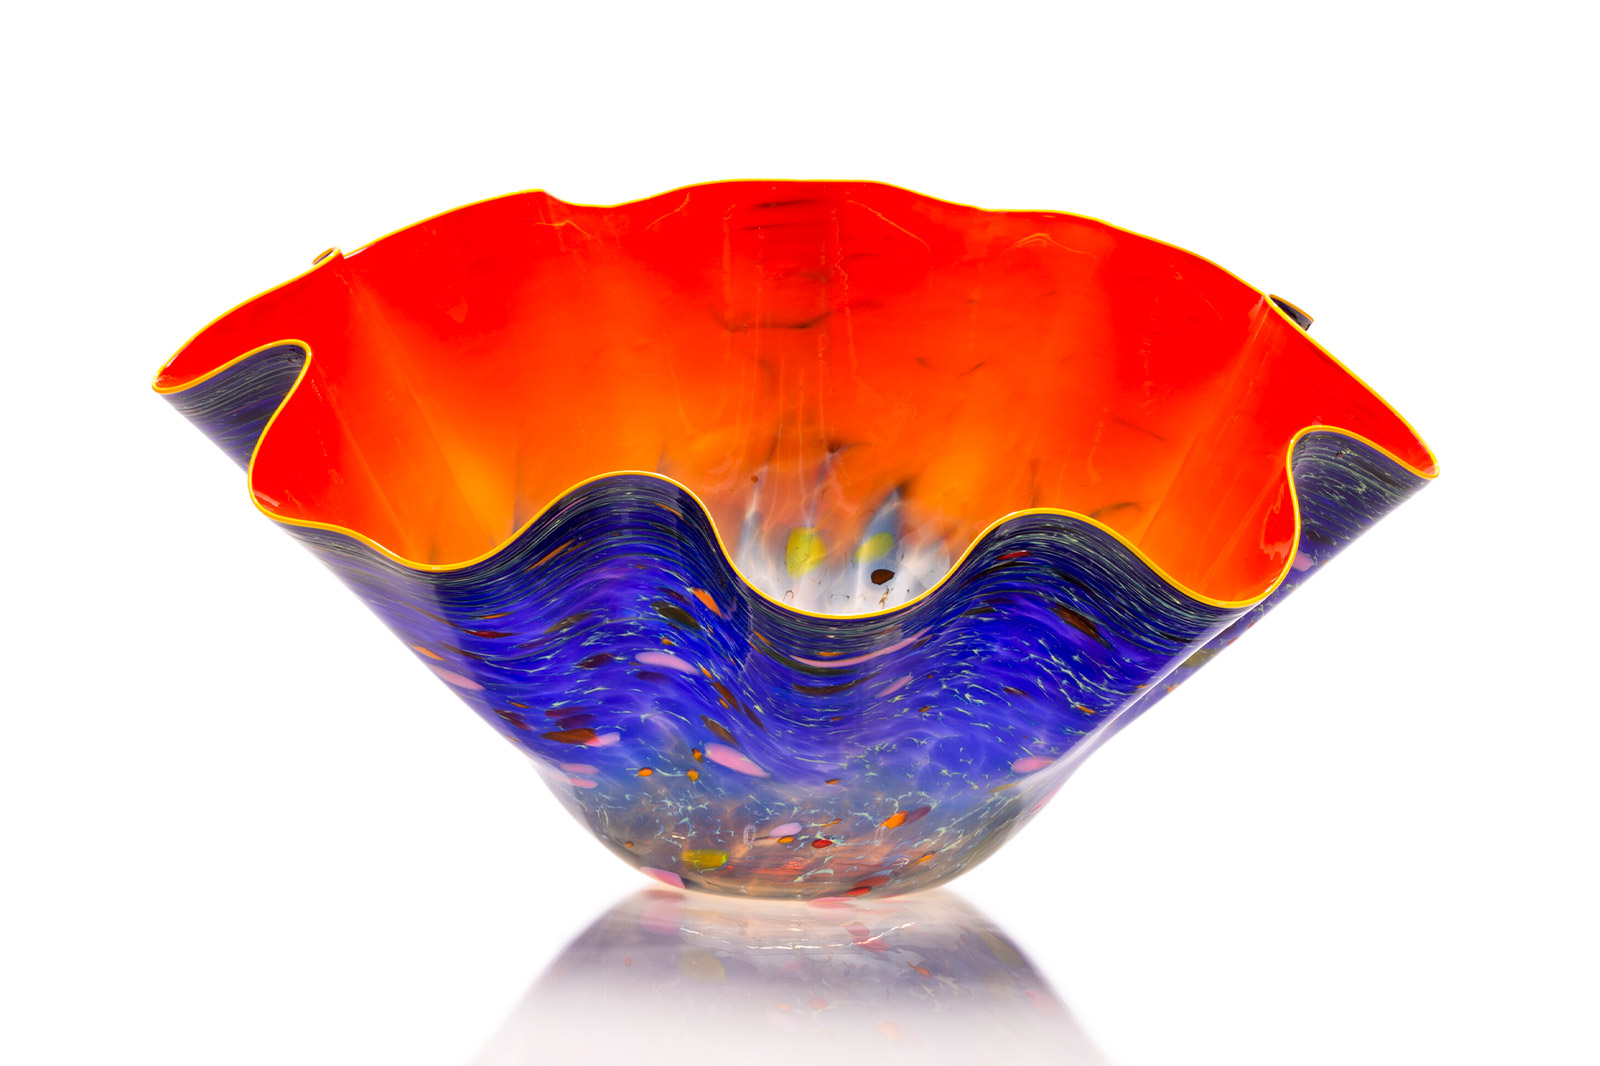 Sunset Macchia with Brilliant Yellow Lip Wrap, 2015, Dale Chihuly